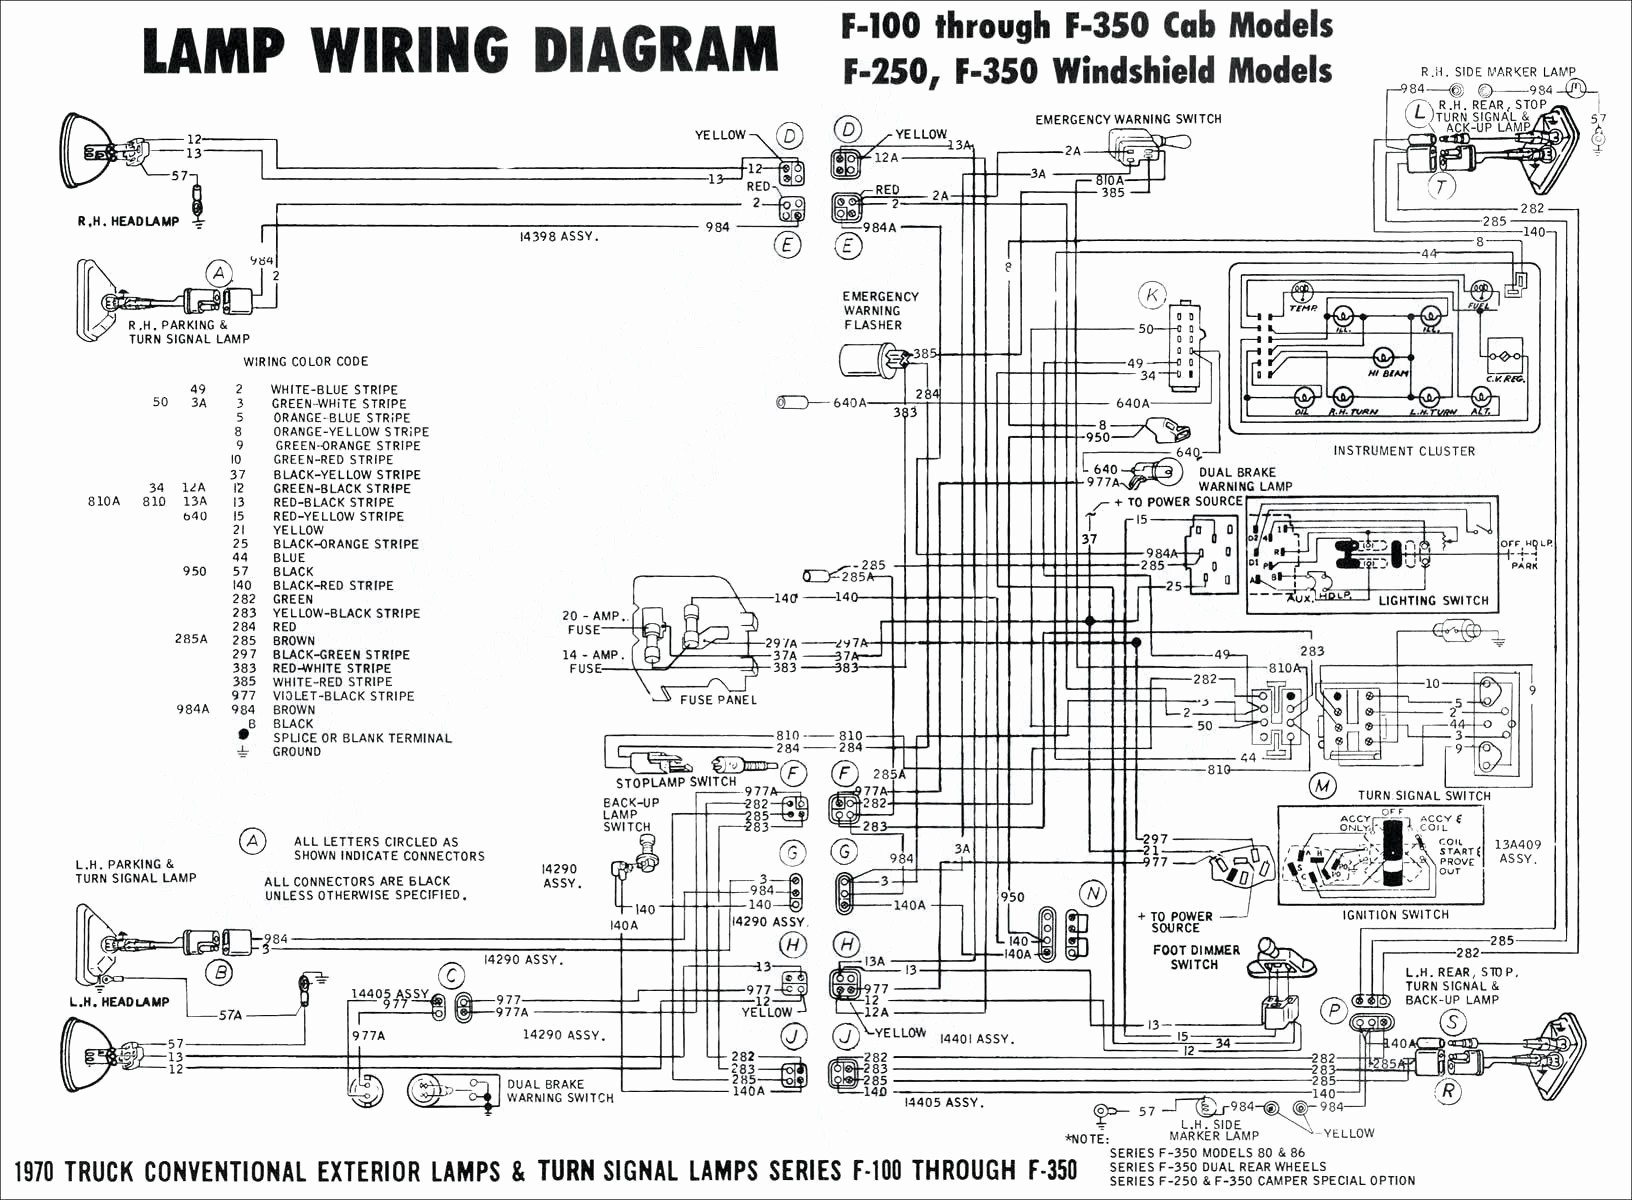 Sk750 Ditch Witch Wiring Diagram Ditch Witch Parts Diagram Of Sk750 Ditch Witch Wiring Diagram